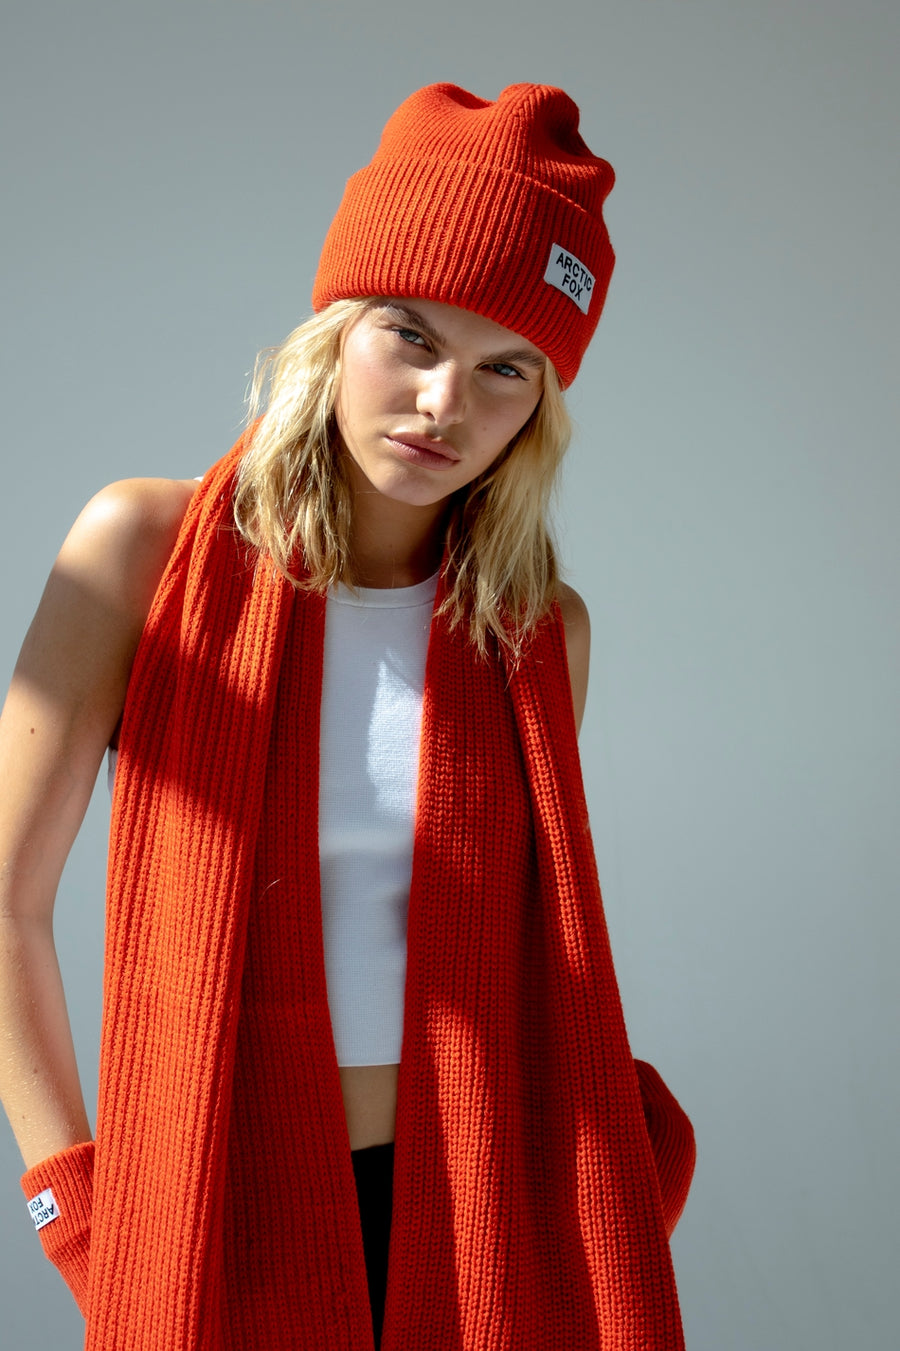 The Recycled Bottle Beanie - Sunkissed Coral